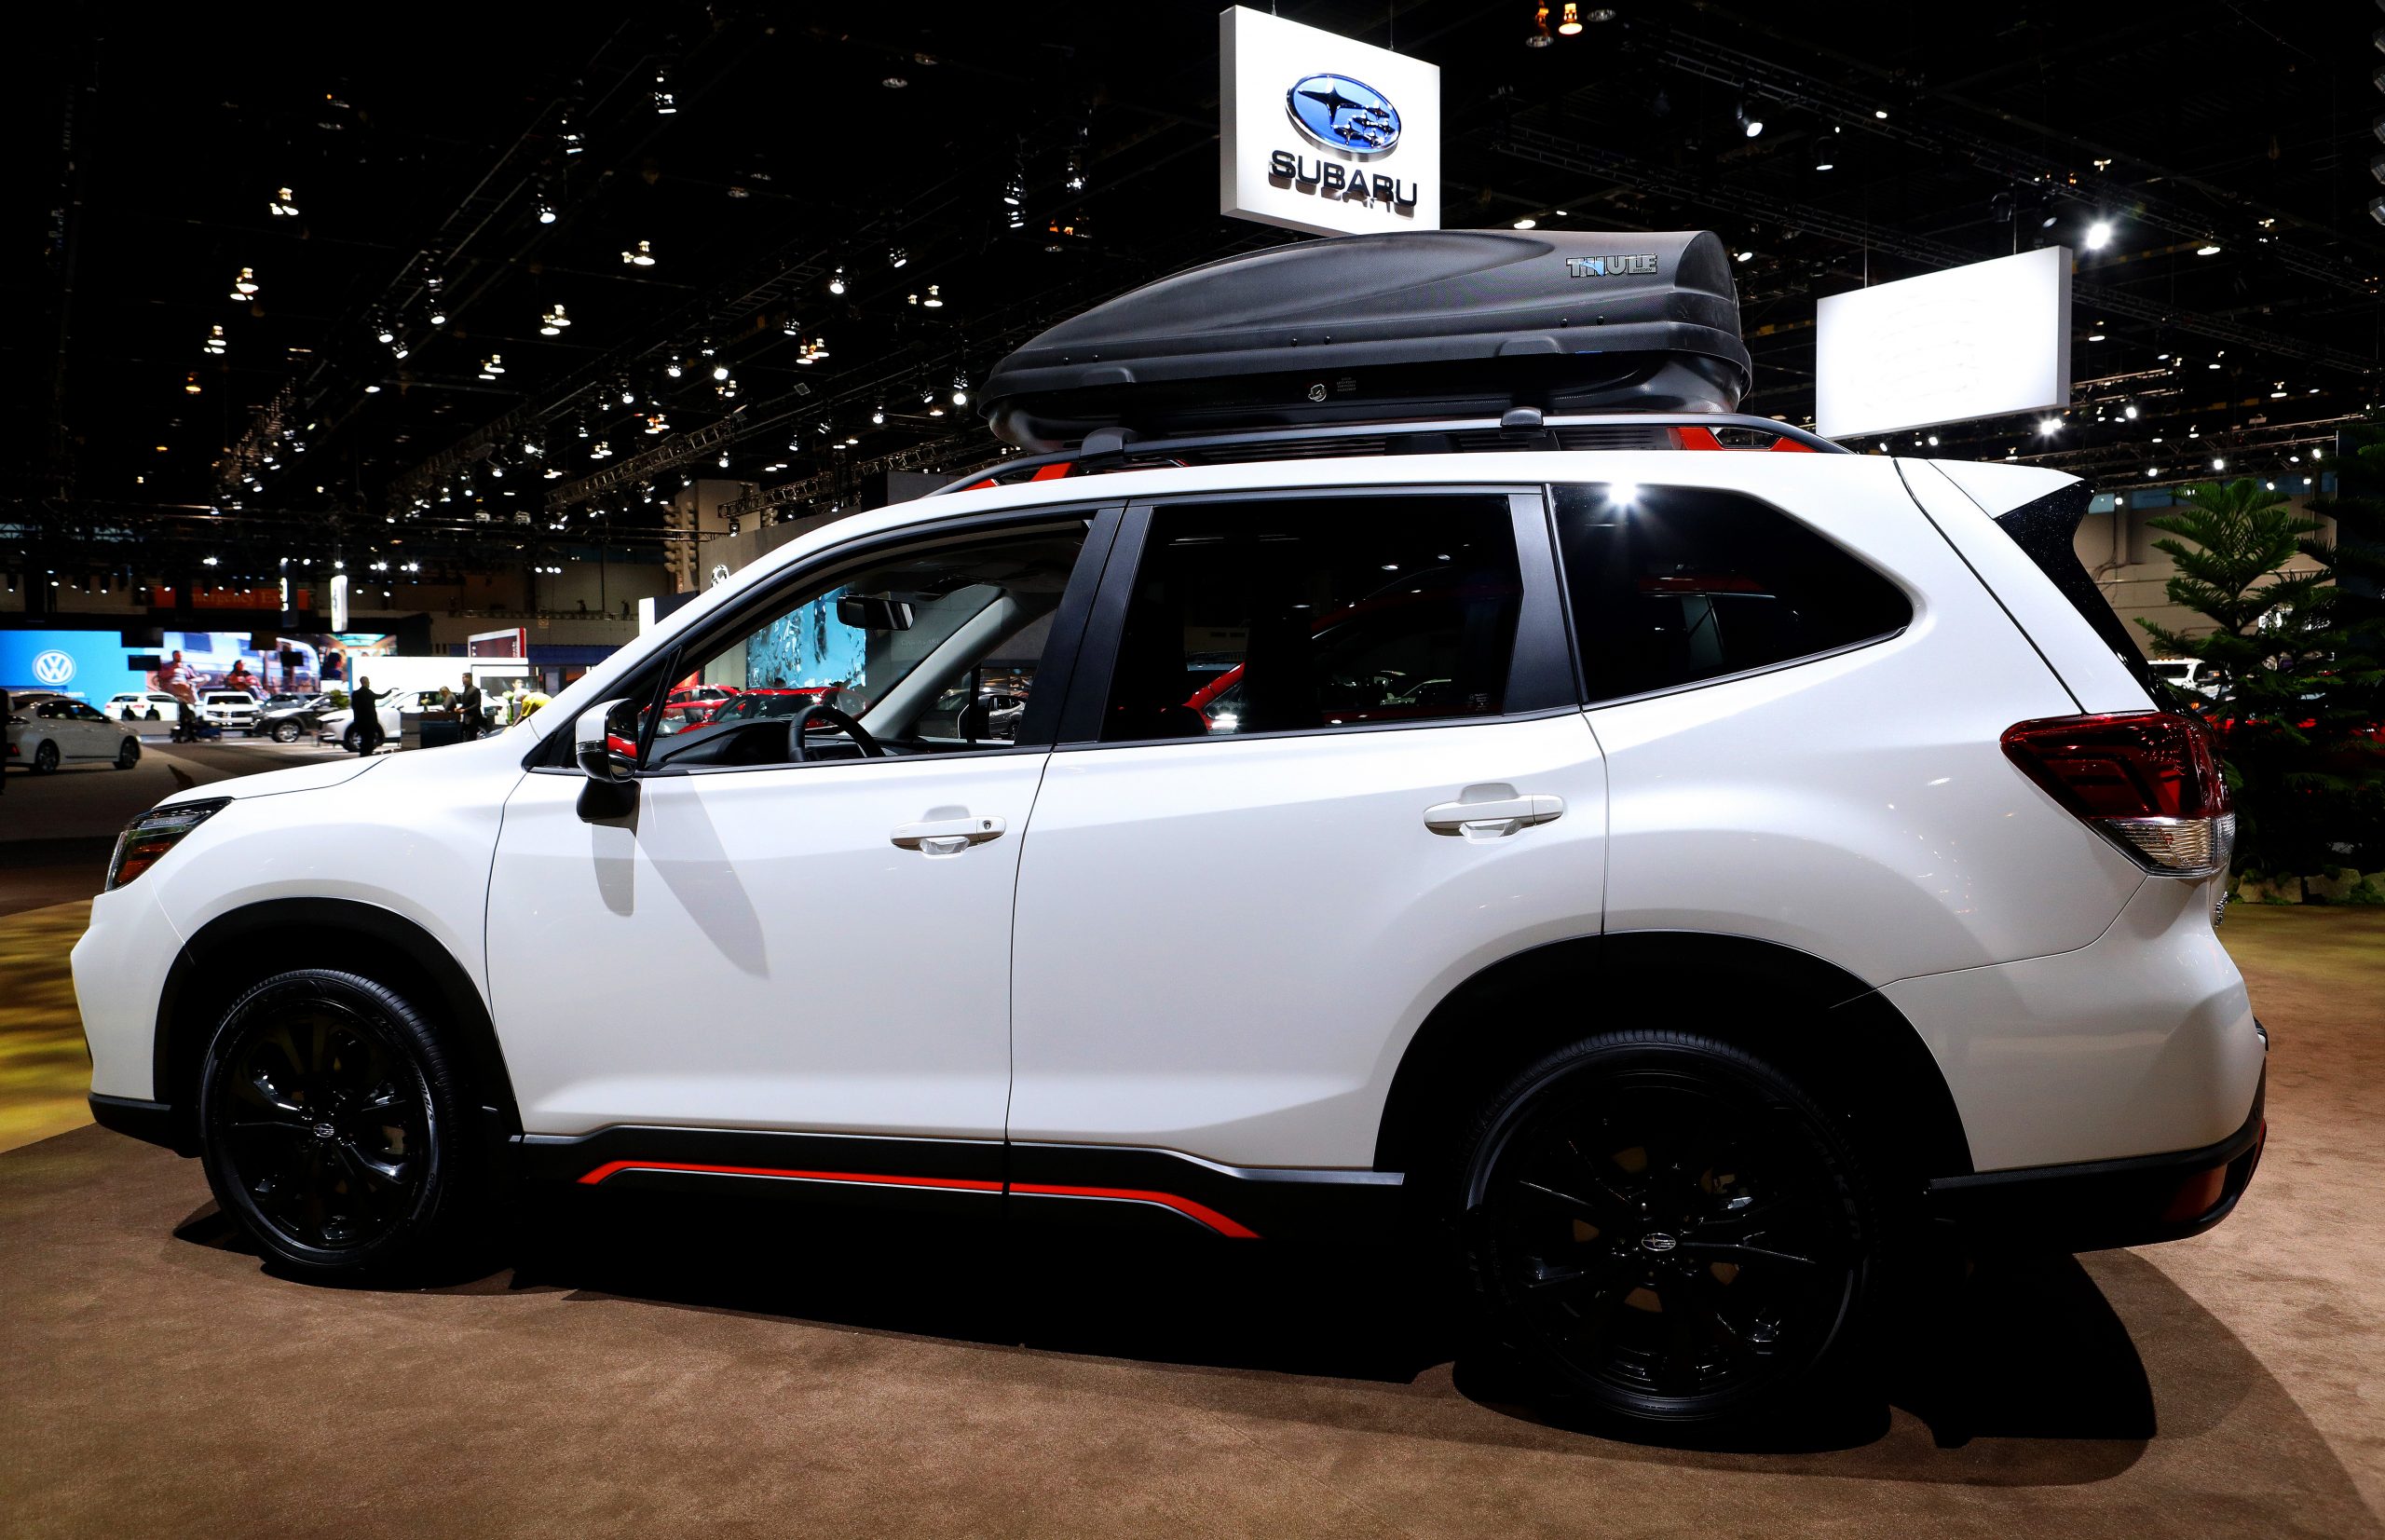 the 2021 Subaru Forester Sport trim on display in white at an auto show